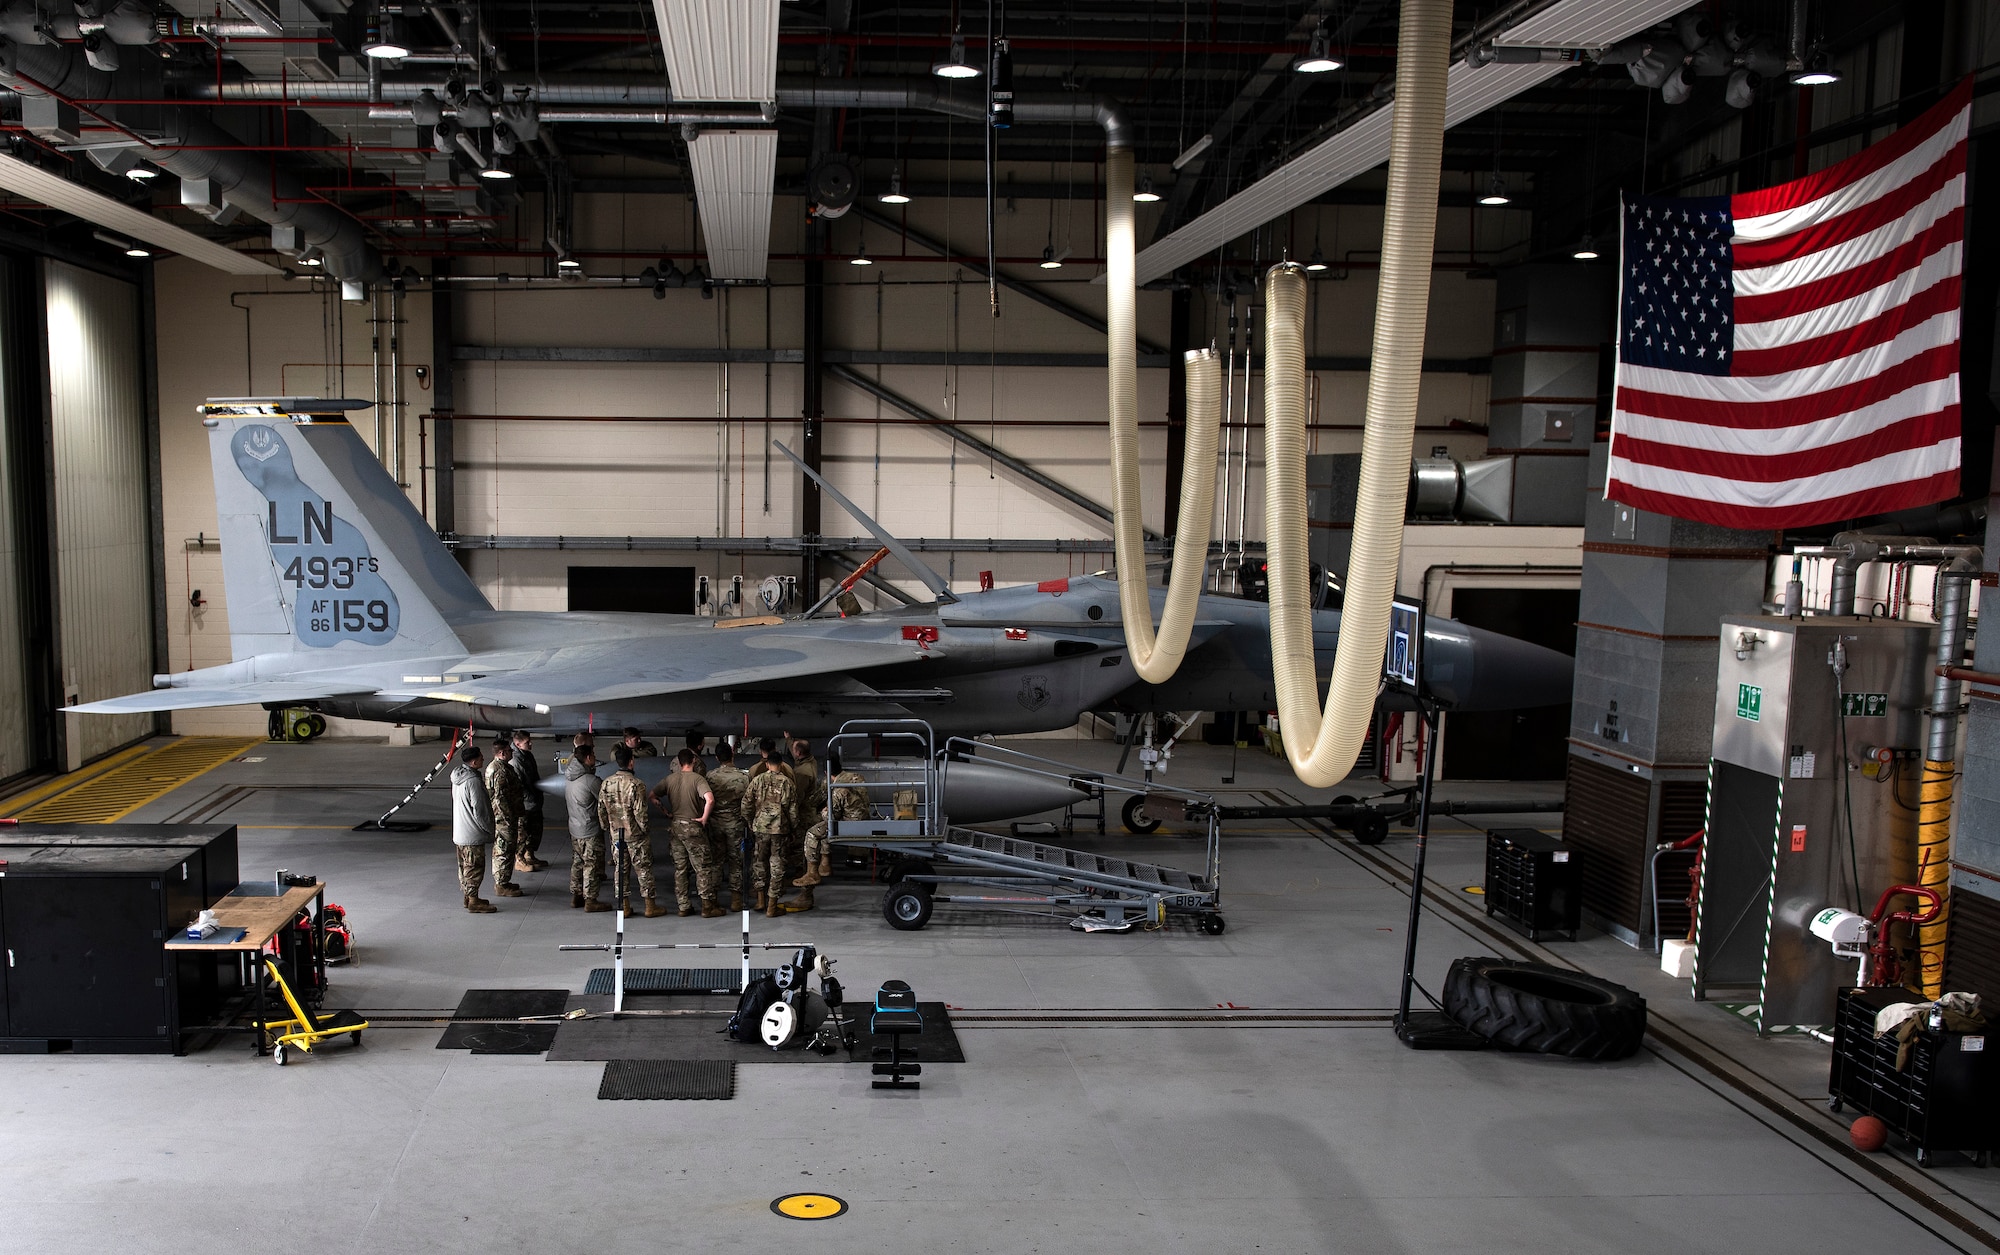 U.S. Air Force Airmen, assigned to the 48th Component Maintenance Squadron fuels systems maintenance shop, attend an Agile Combat Employment training at Royal Air Force Lakenheath, England, Aug. 31, 2020. The training was designed to enhance ACE capabilities by teaching Airmen to perform multiple roles outside the scope of their regular daily duties. (U.S. Air Force photo by Airman 1st Class Jessi Monte)